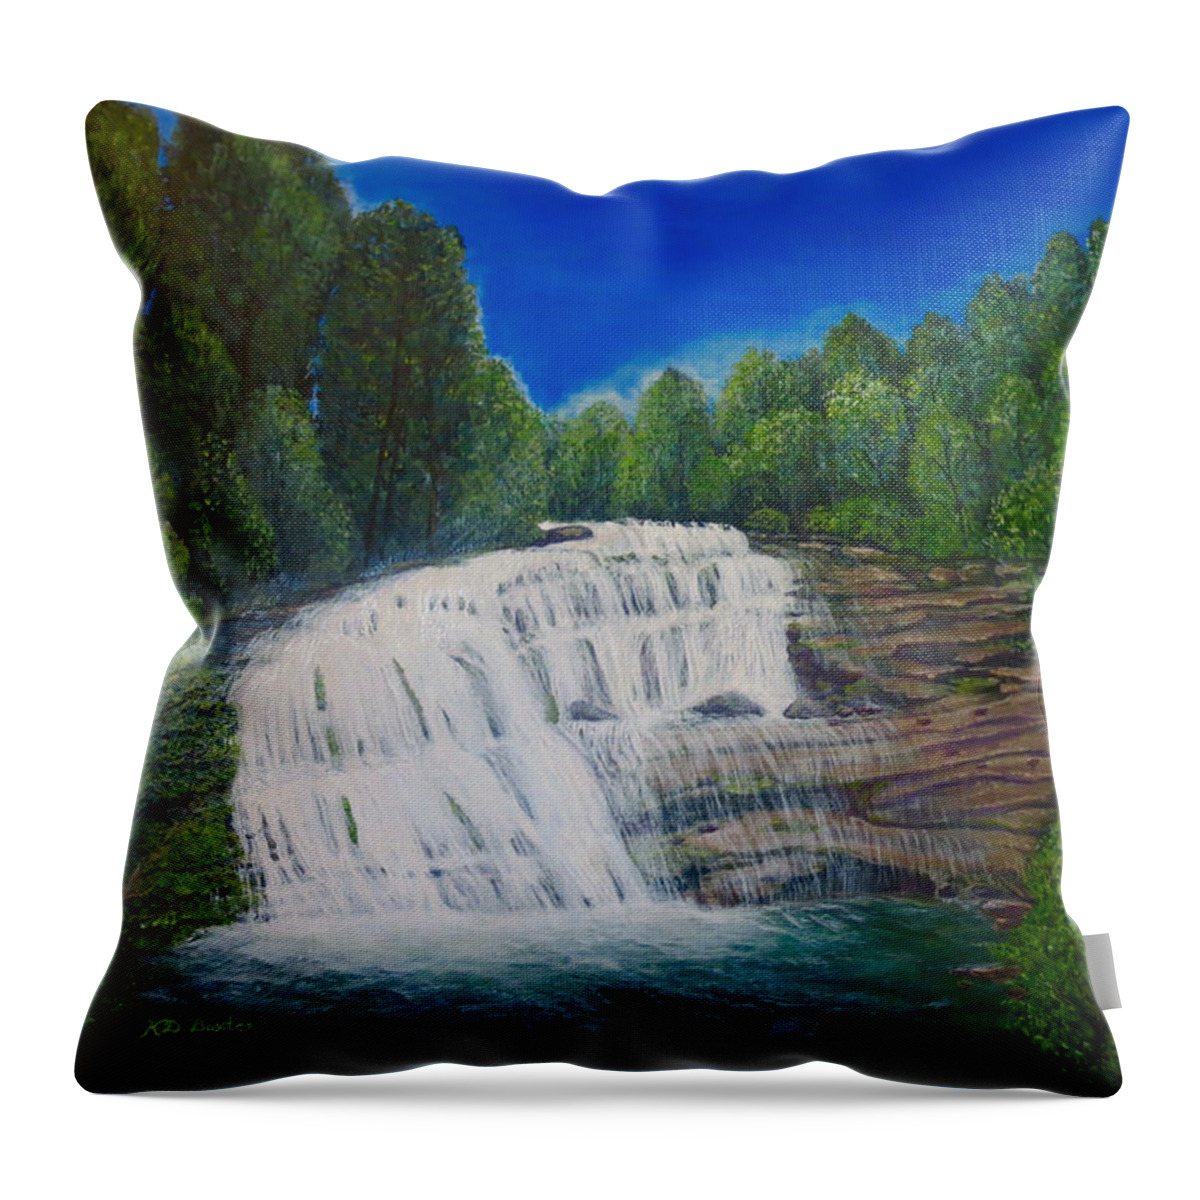 Bald River Falls Full Cascading Waterfall Blue Skies Overhead And Lined With Deciduous And Evergreen Trees On Either Side Clear Blue Green Water With White Water Pooling At Bottom Sunlight On River Rock Balance Of Cool And Warm Tones Waterfall Nature Scenes Acrylic Waterfall Painting Throw Pillow featuring the painting Majestic Bald River Falls of Appalachia II by Kimberlee Baxter